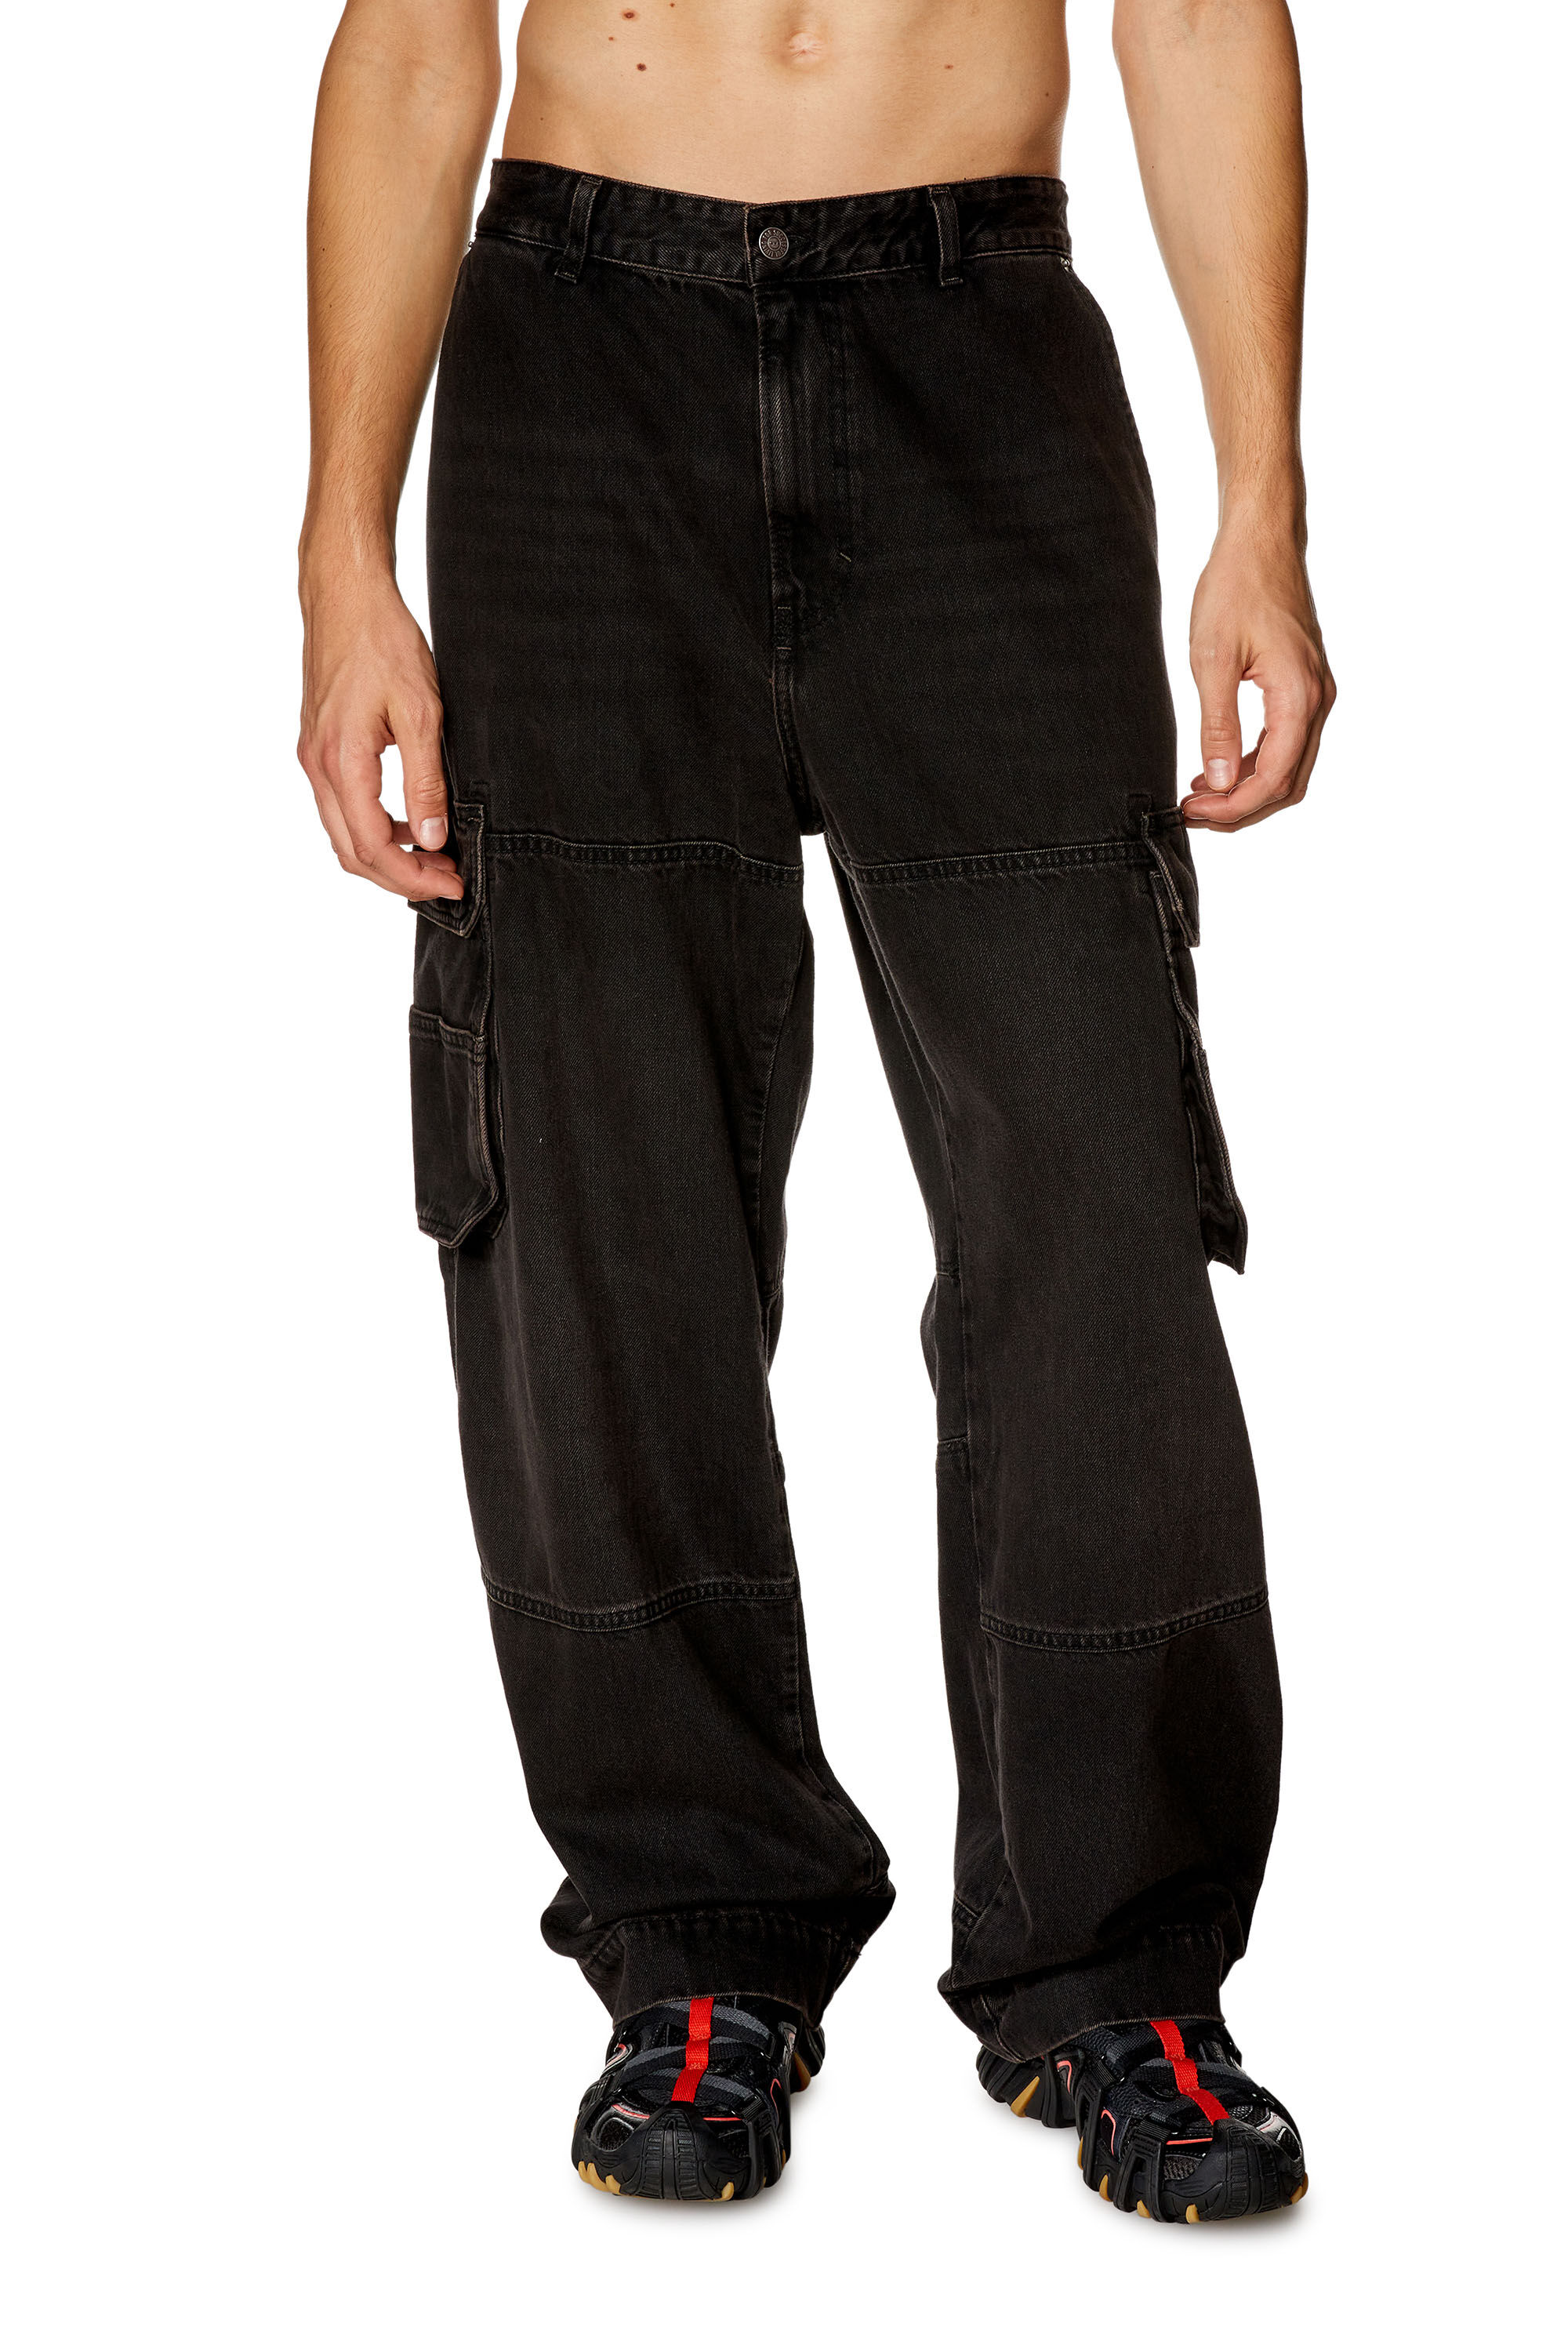 Straight Leg Pull On Stretch Pant, Made in Canada, Clientele